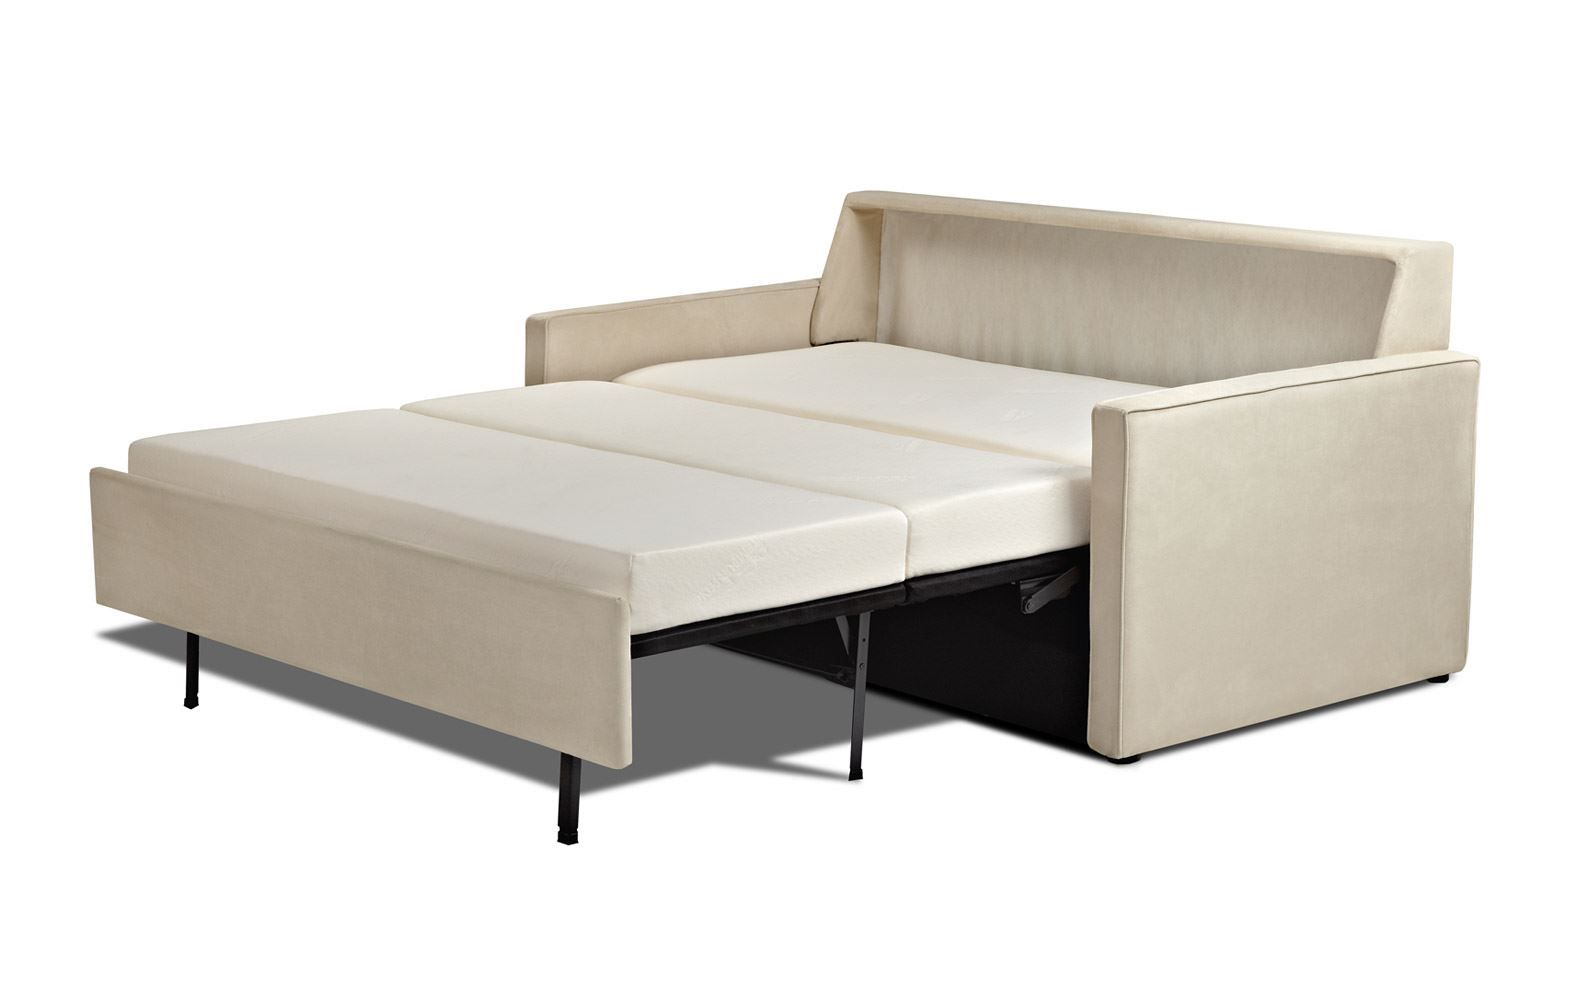 Posh Tempurpedic Sofa Bed Design For Fashionable In Felton Modern Style Pullout Sleeper Sofas Black (View 12 of 15)